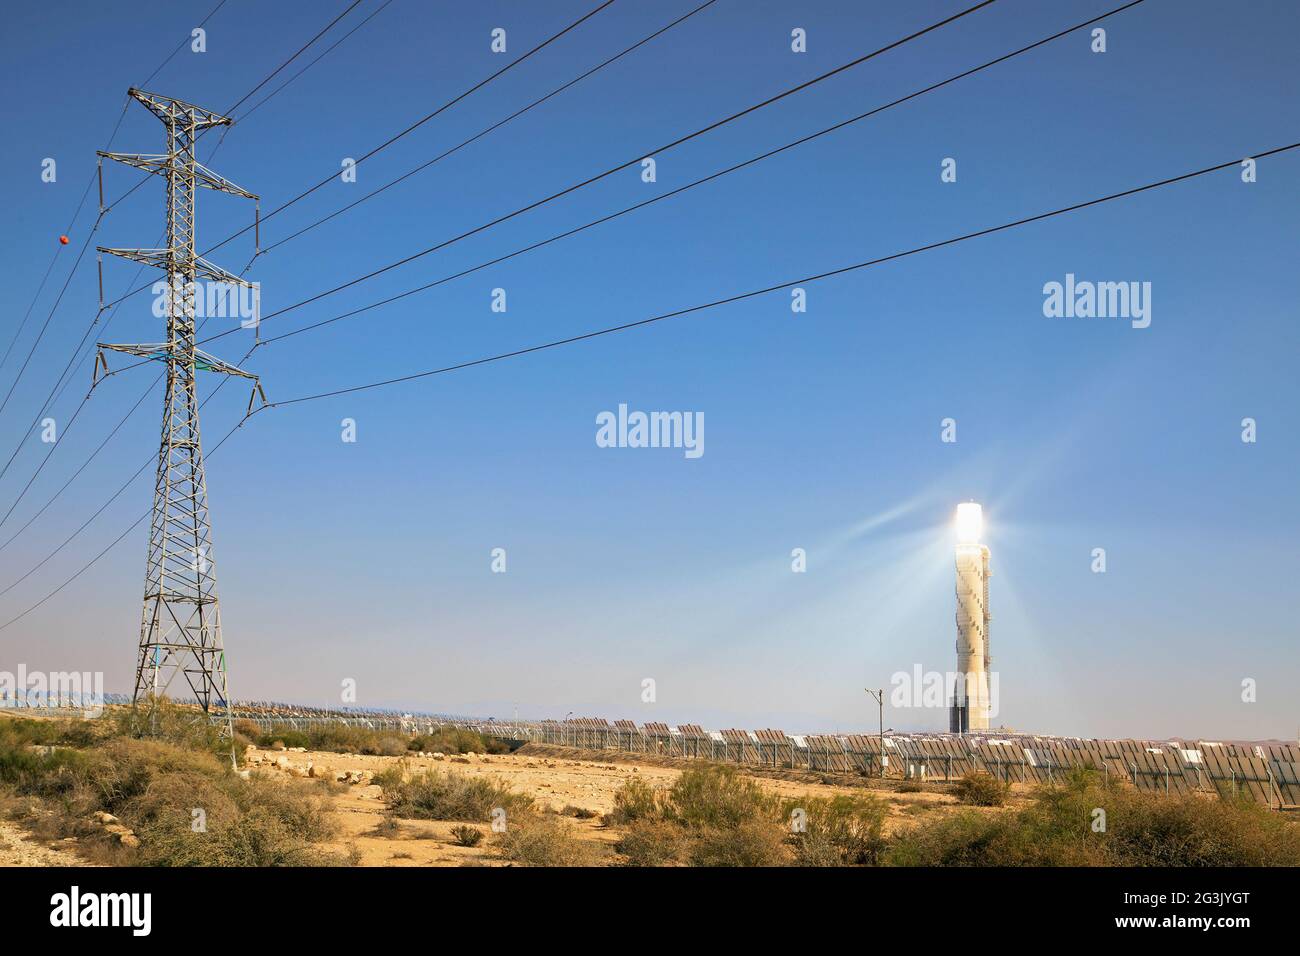 Ashalim solar power station in the Negev desert. Adjustable reflecting mirrors focus the sun's rays onto a boiler on top of 250m tall solar tower Stock Photo